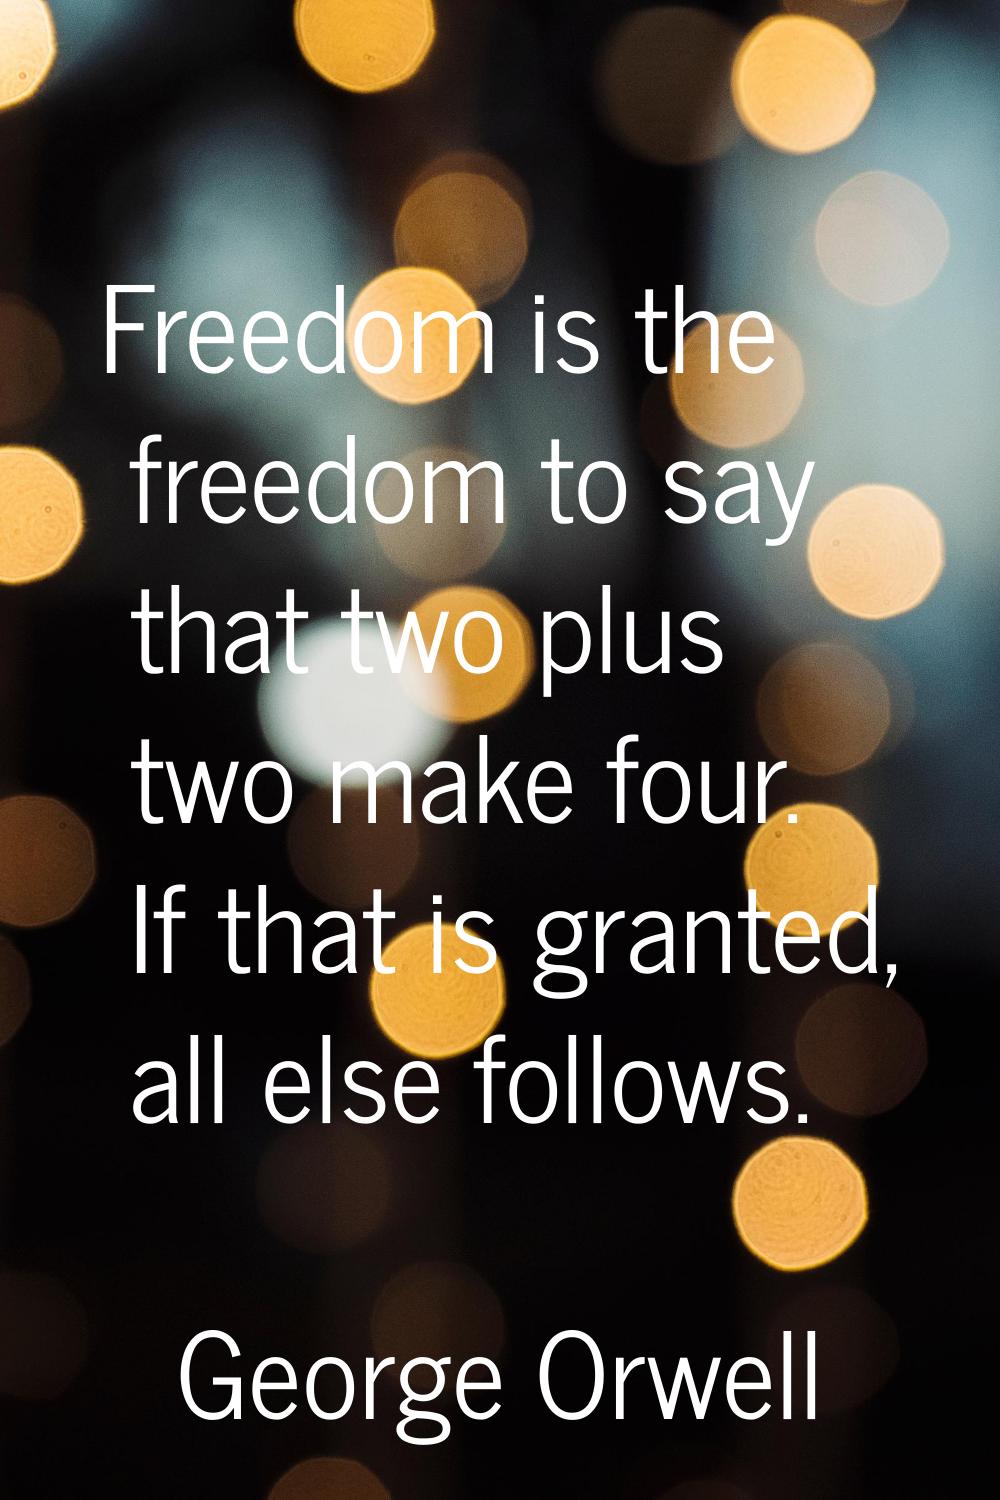 Freedom is the freedom to say that two plus two make four. If that is granted, all else follows.